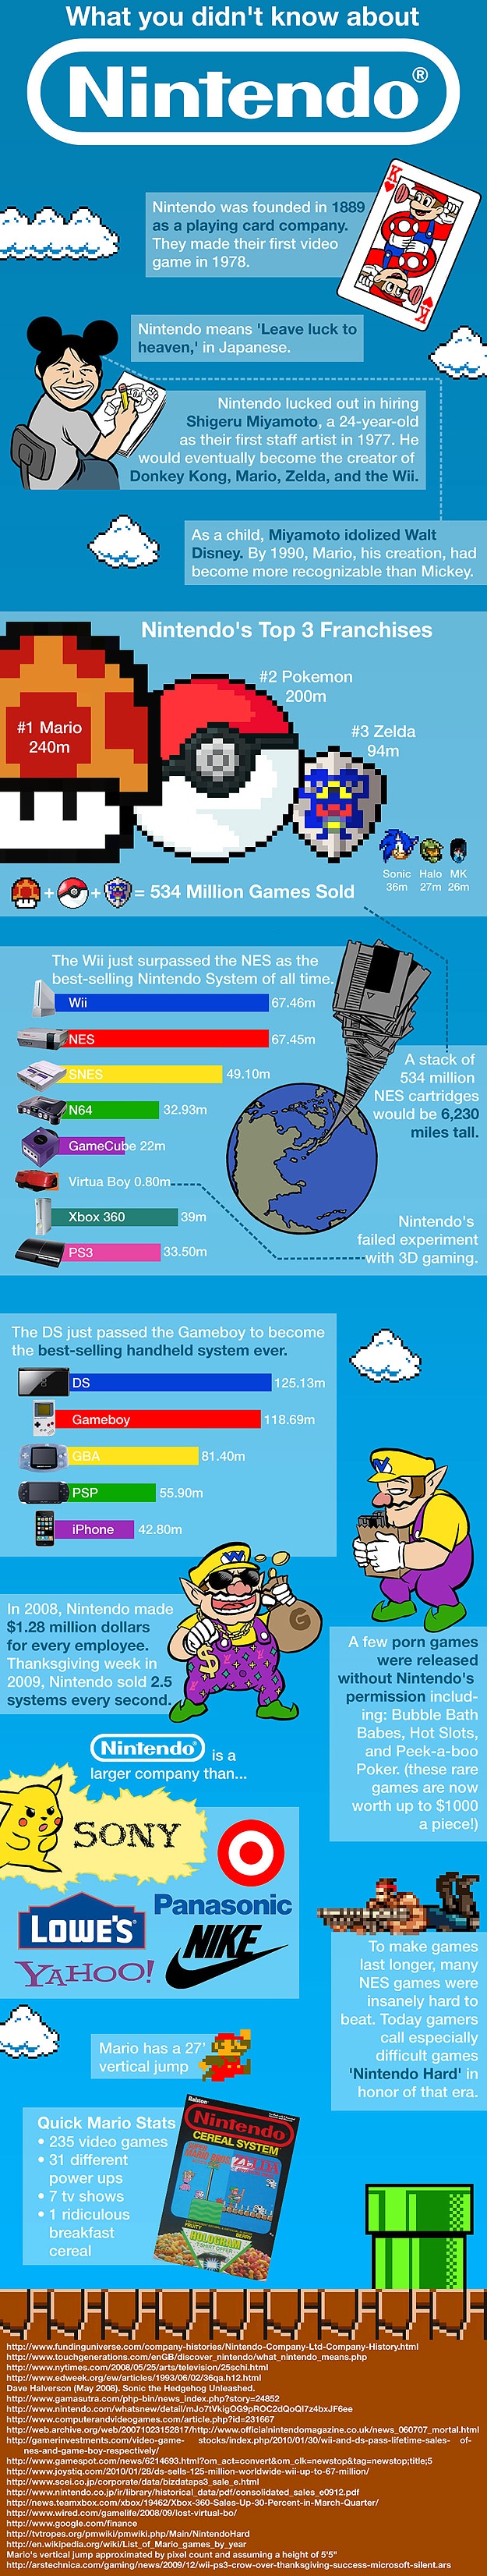 Facts You Probably Didn’t Know About The Nintendo Company